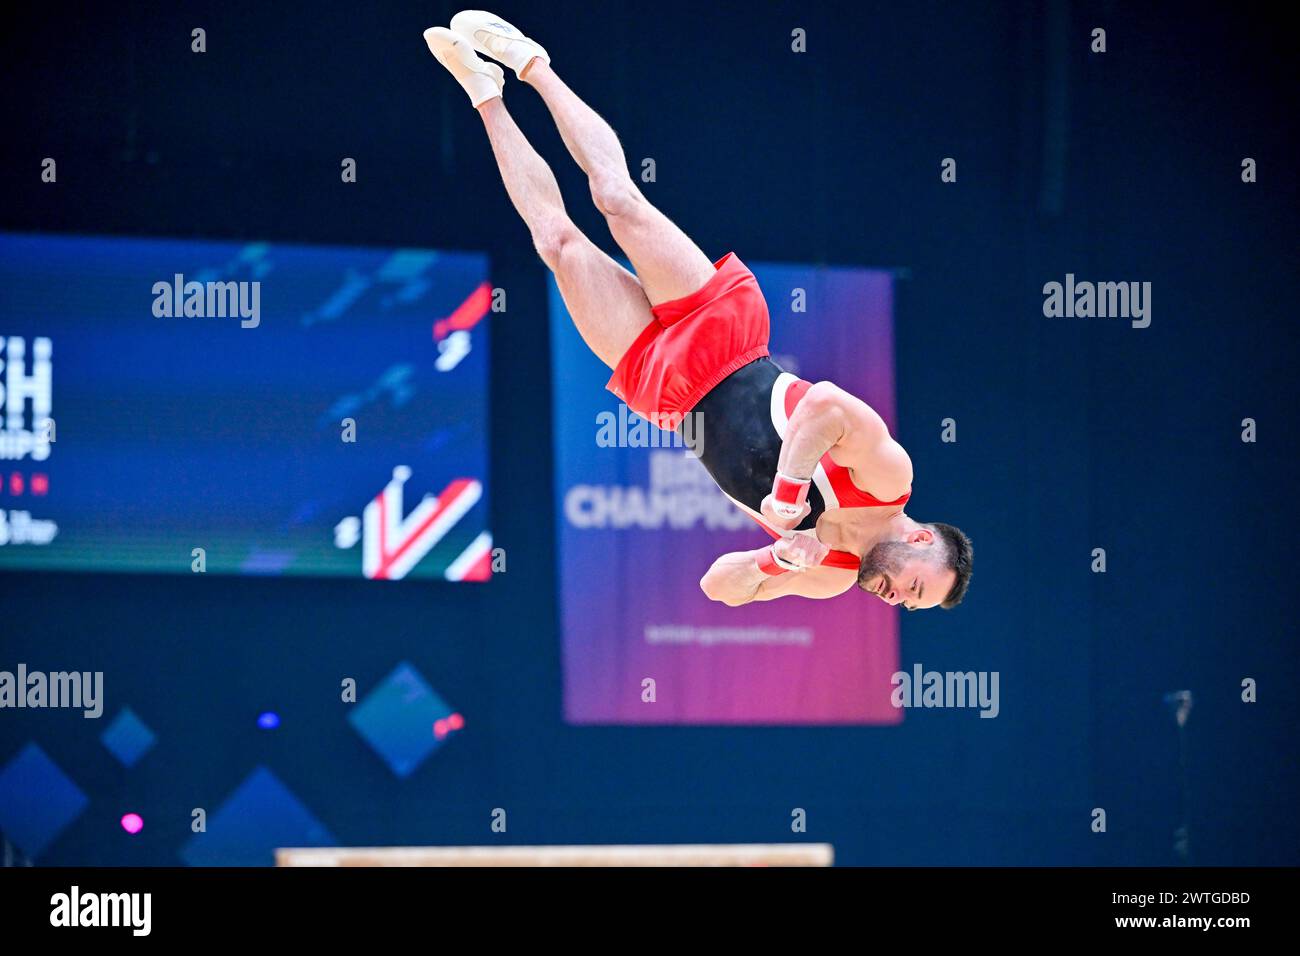 Liverpool, England, UK. 17th Mar, 2024. James HALL in the Mens Floor Final during the British Gymnastics Championships at the M&S Bank Arena, Liverpool, England, UK. Credit: LFP/Alamy Live News Stock Photo